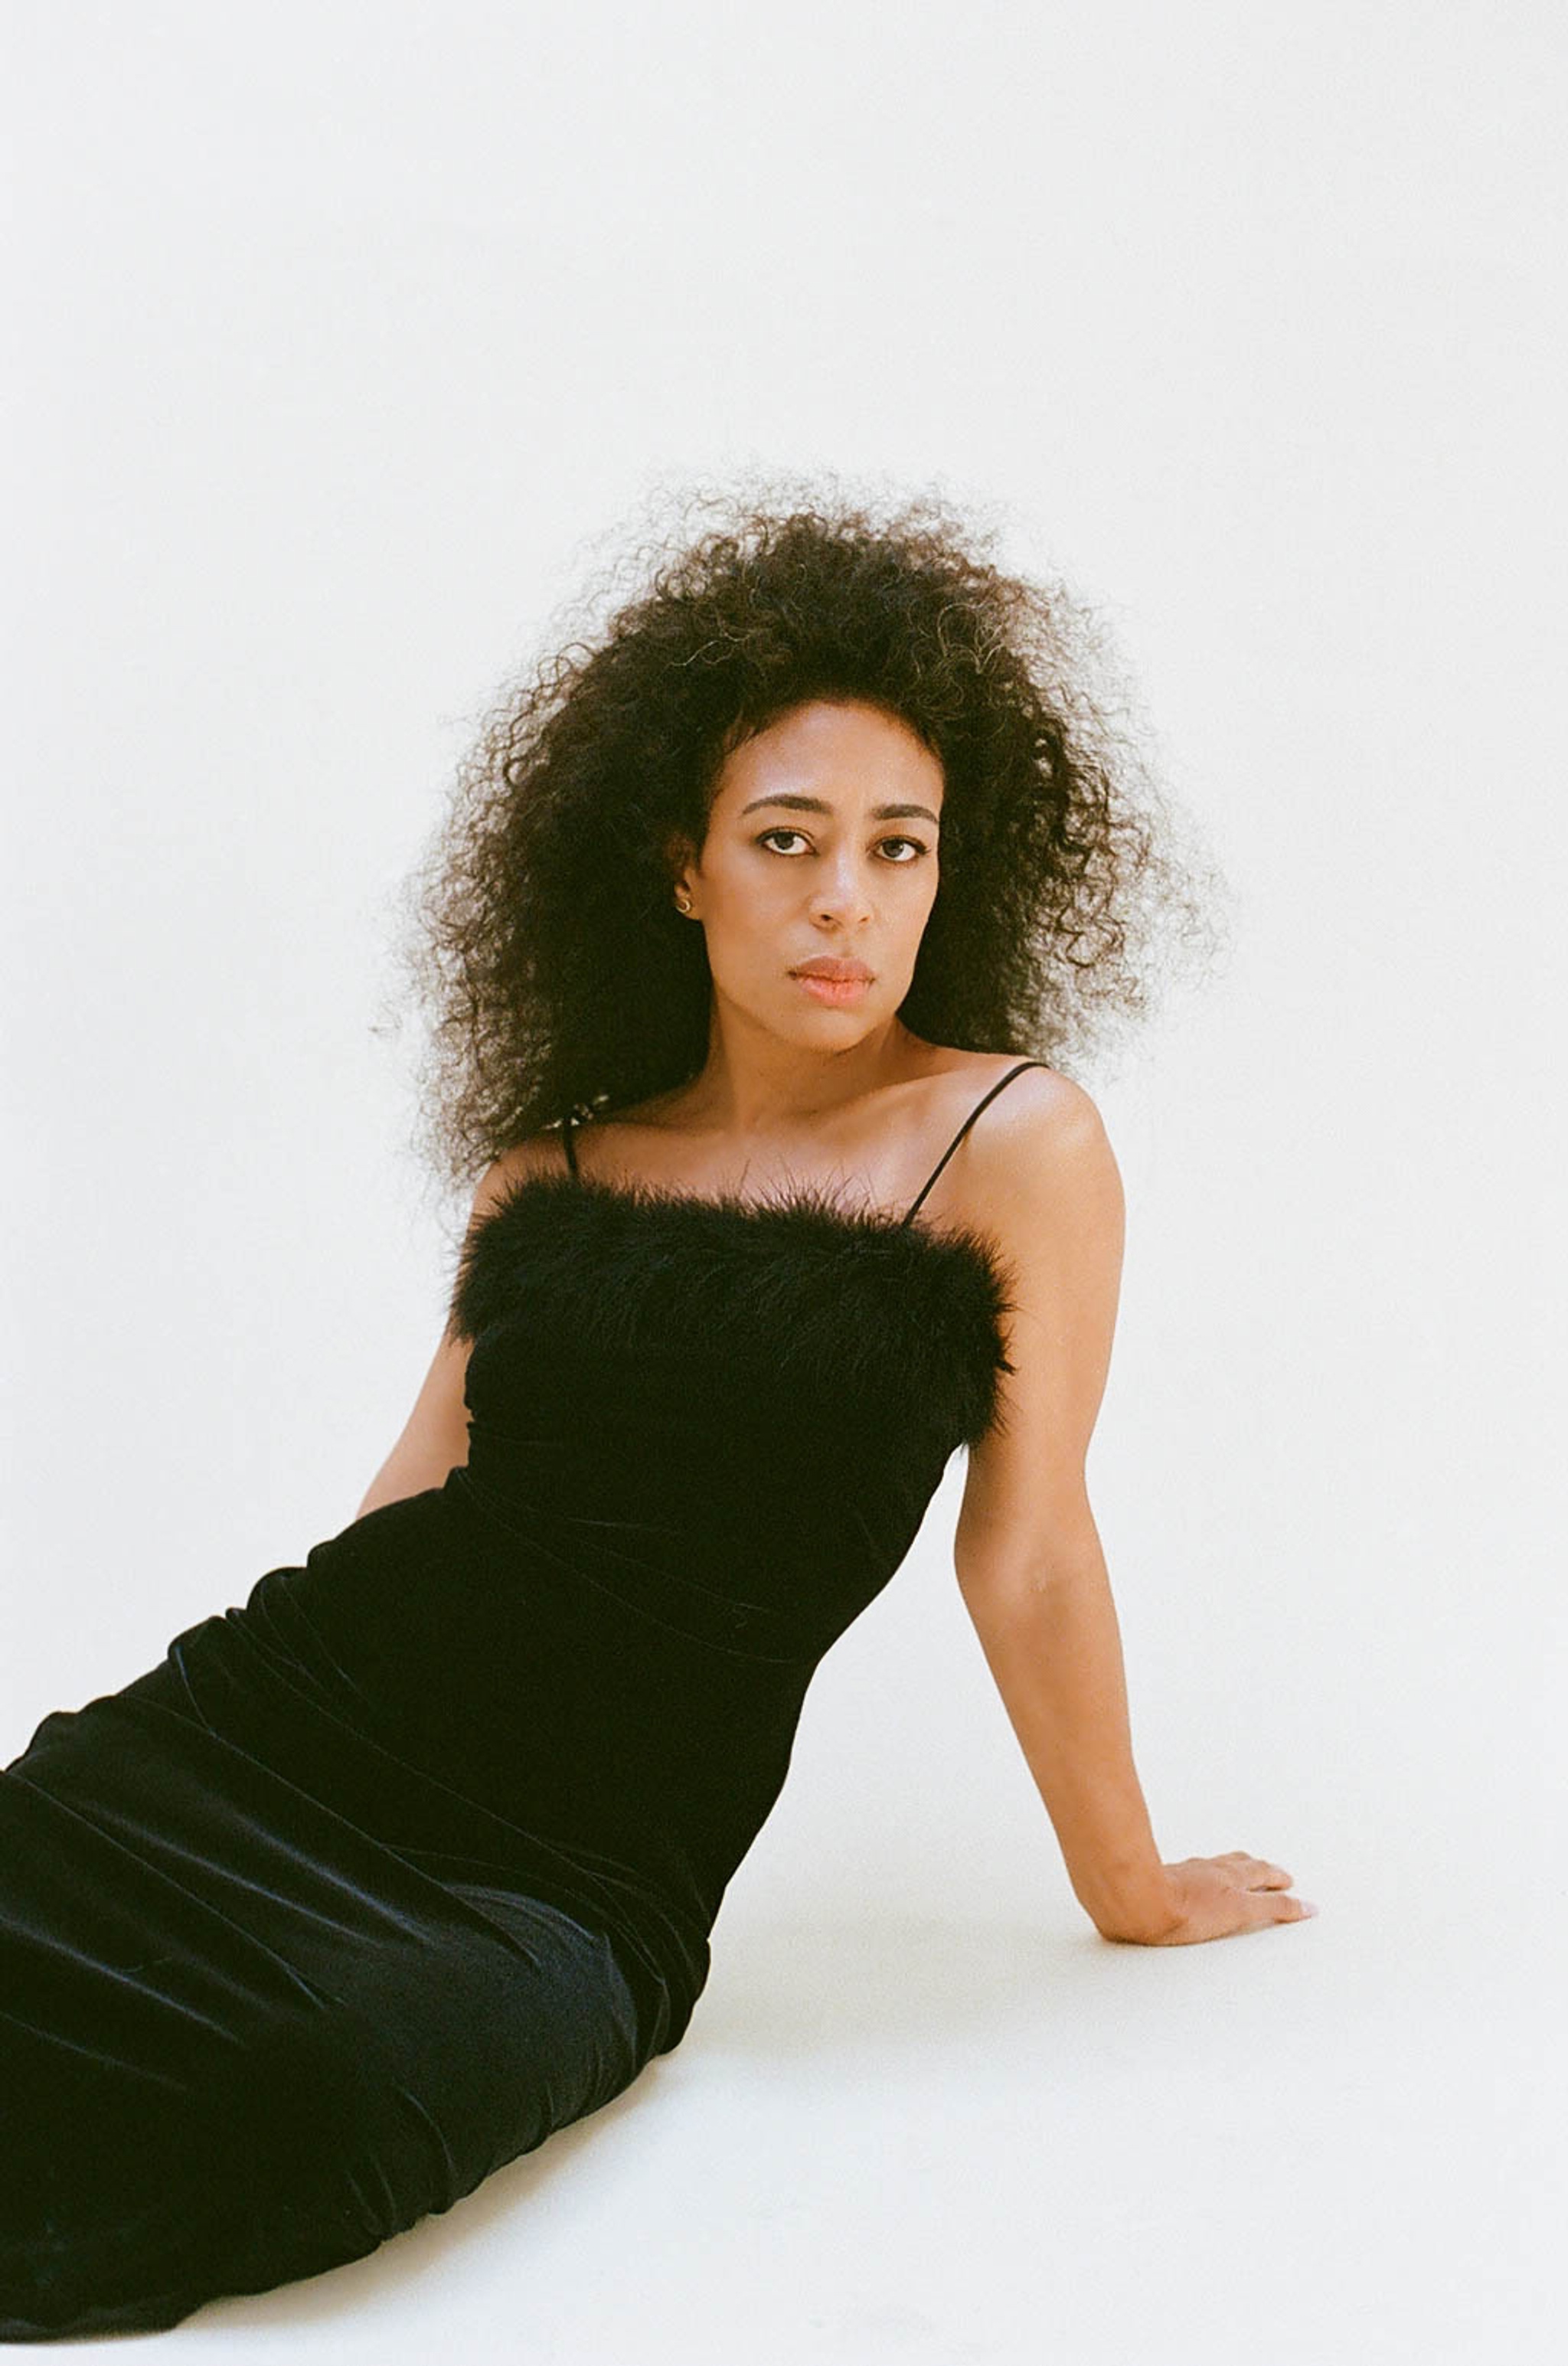 The artist Candice Hoyes, a Black woman with light brown skin and curly brown hair, reclines against a white backdrop. She wears a long black, velvety dress with a band of black fur across the chest. She looks directly at us with a focused, neutral expression.